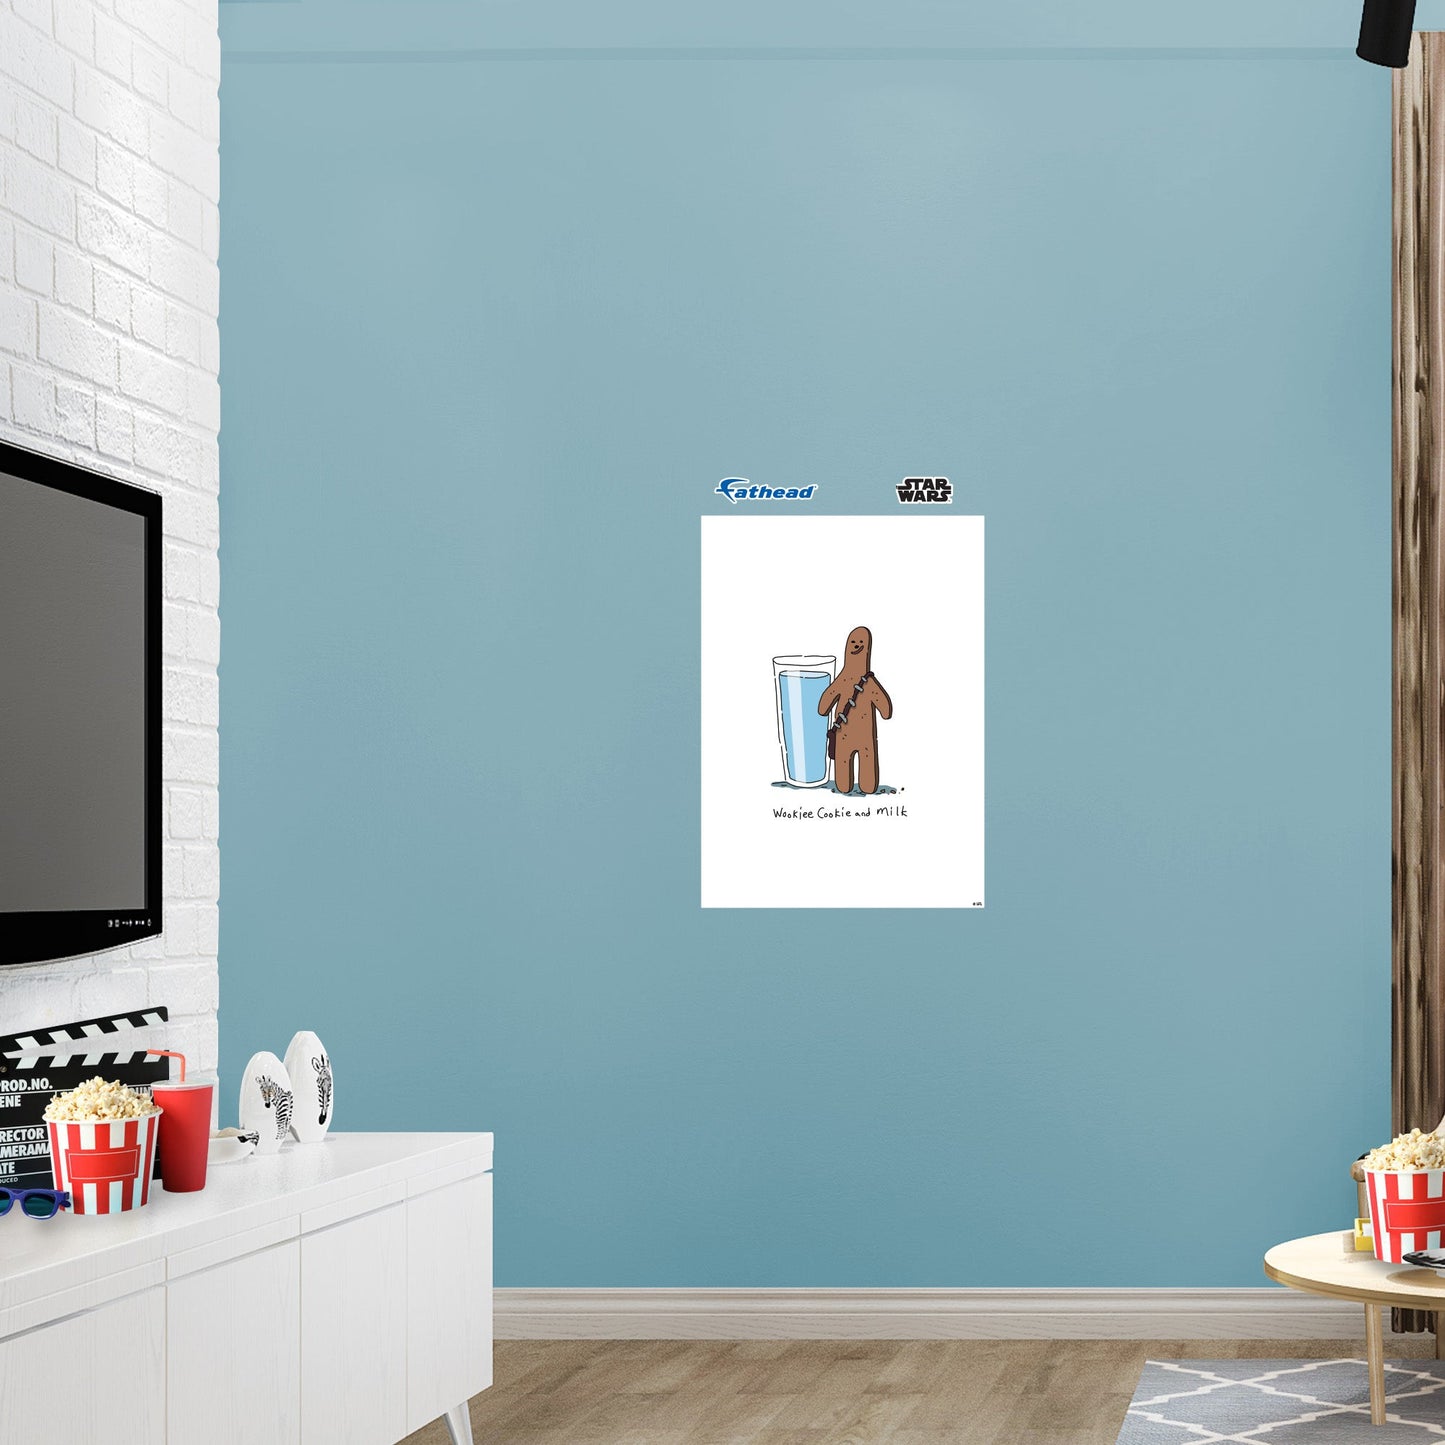 Wookiee Cookie and Milk Poster        - Officially Licensed Star Wars Removable     Adhesive Decal